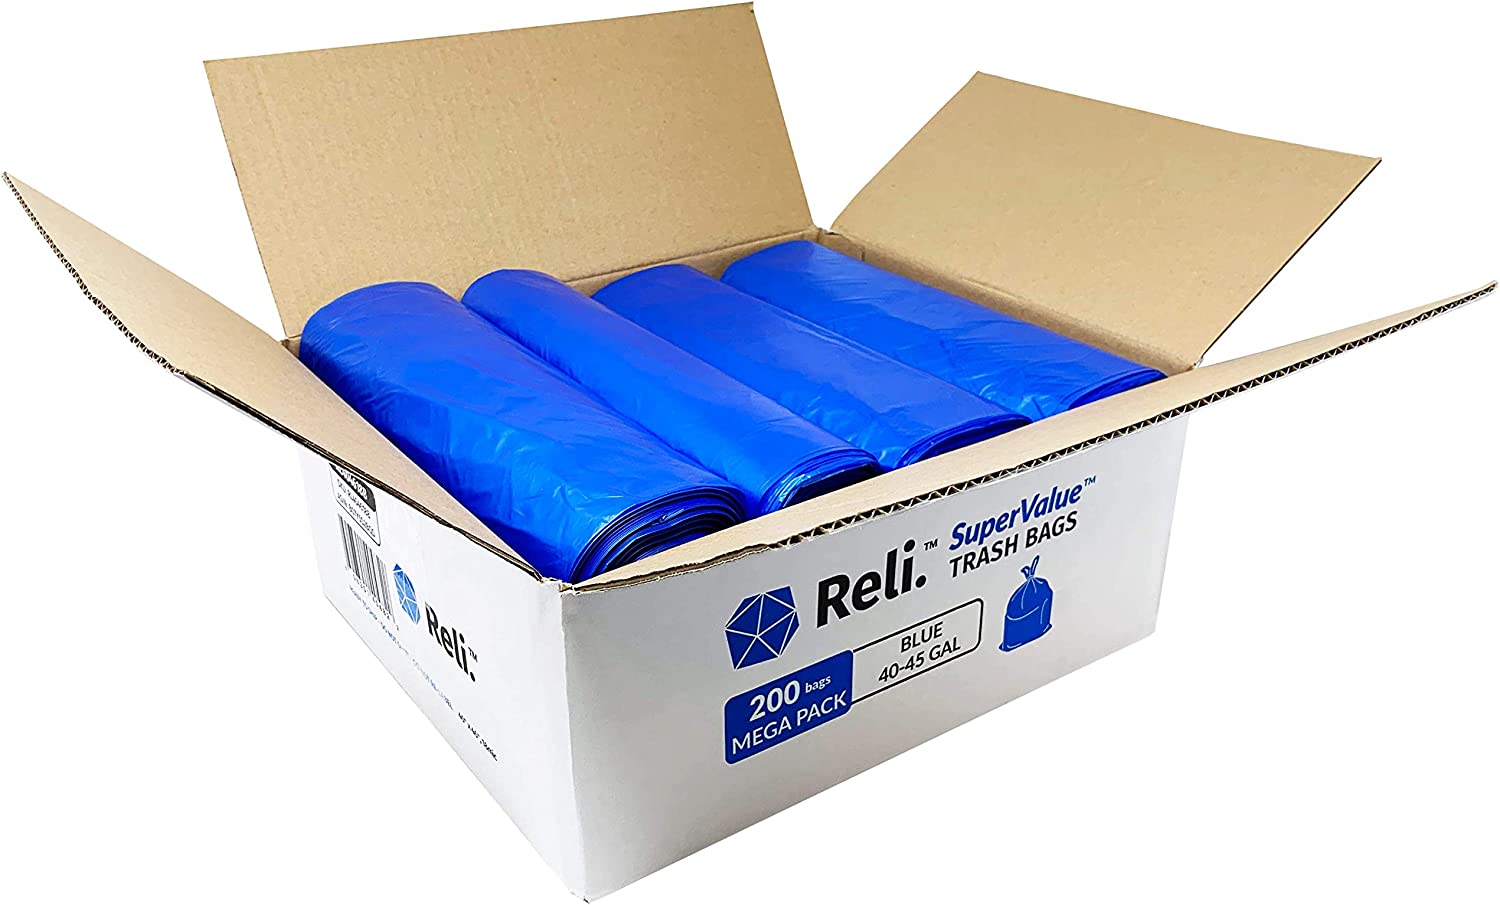 https://discounttoday.net/wp-content/uploads/2022/11/Reli.-SuperValue-40-45-Gallon-Recycling-Bags-200-Count-Bulk-Blue-Trash-Bags-for-Recycling-Made-in-USA-40-Gallon-42-Gallon-45-Gallon-Trash-Bags-Large-Garbage-BagsCan-Liners-40-45-Gal-Blue.-1.jpg